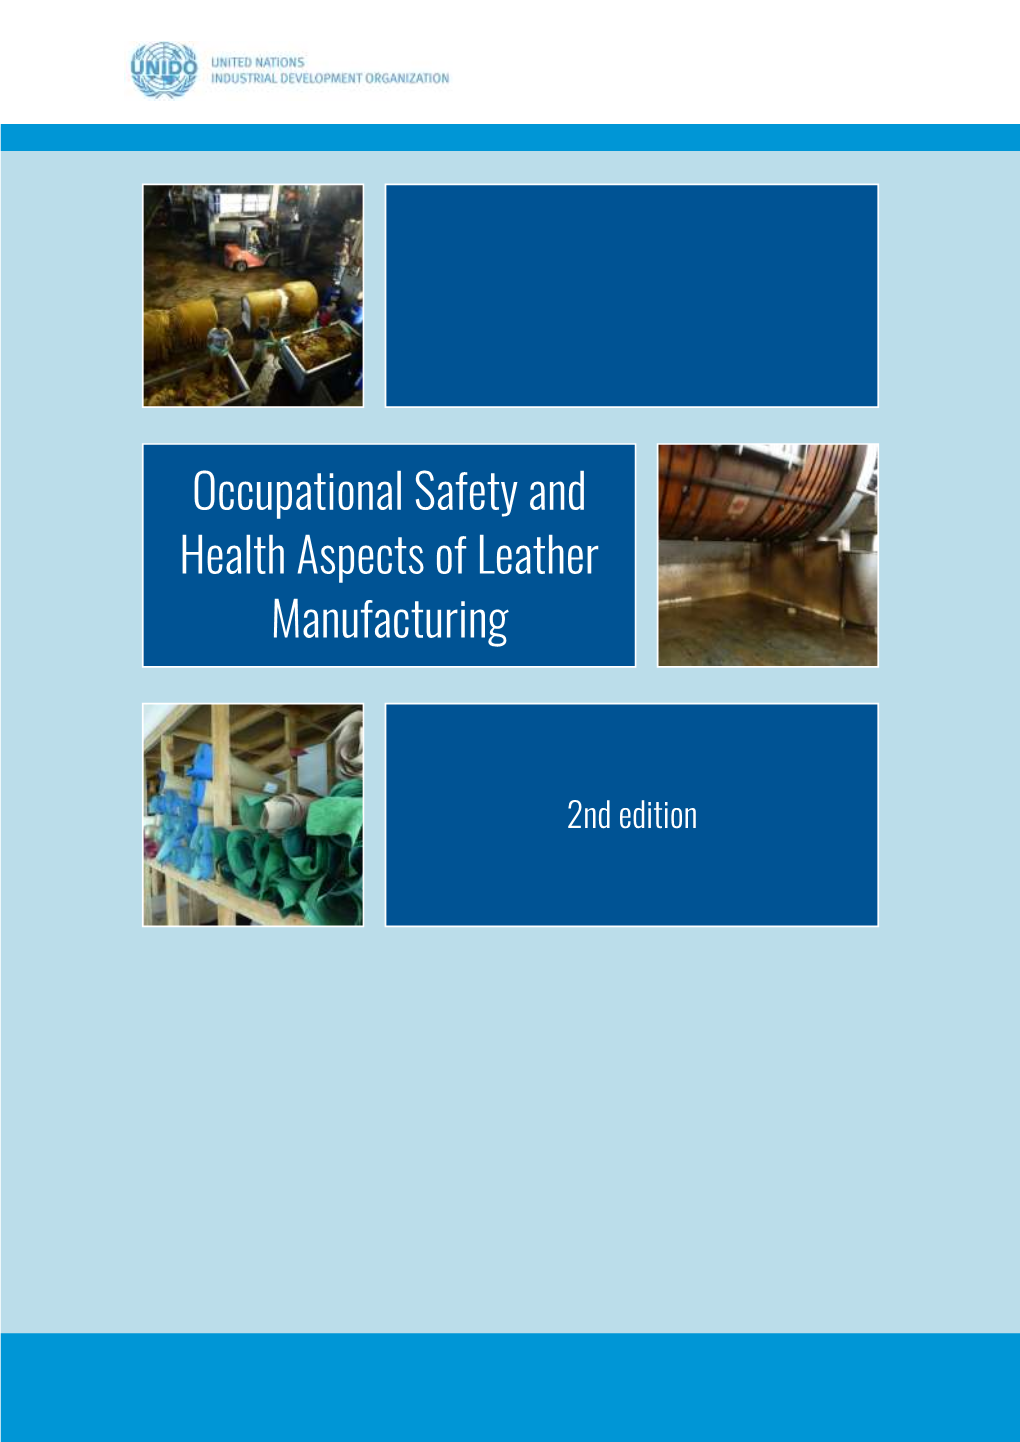 Occupational Safety and Health Aspects of Leather Manufacturing